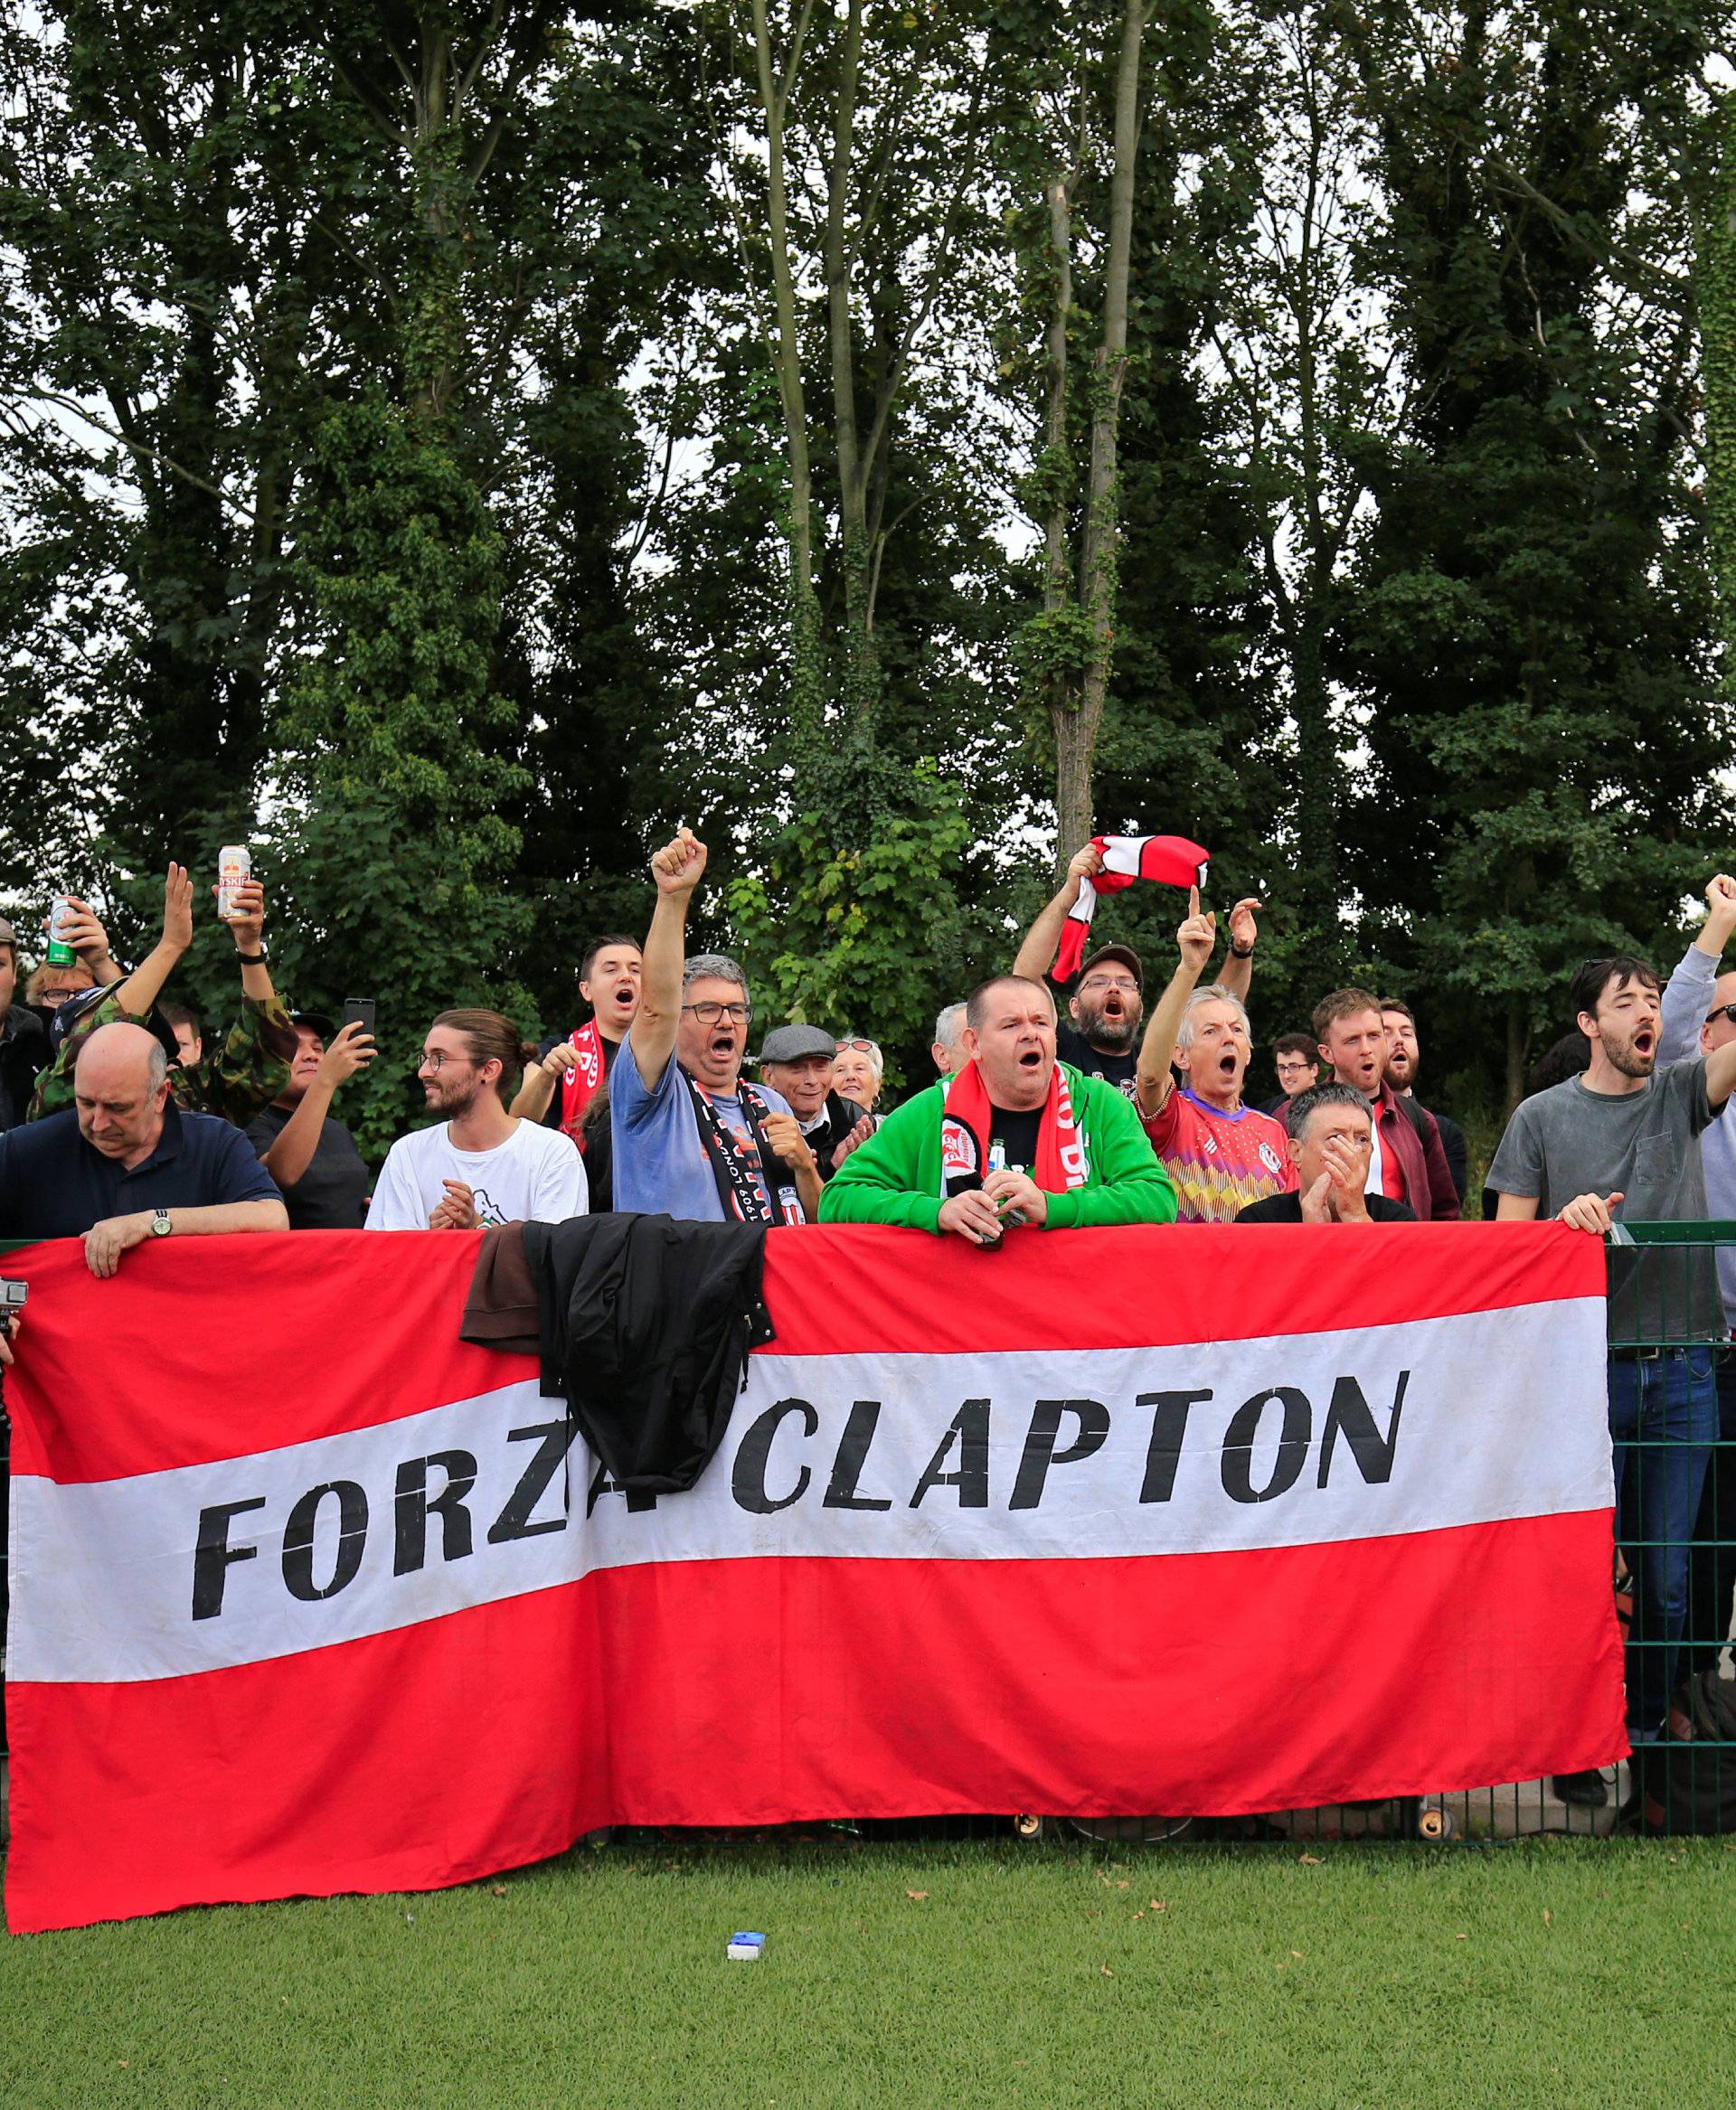 Clapton CFC supporters react after their team won 2-0 in away game against Healing Town in East Acton, in London, Britain